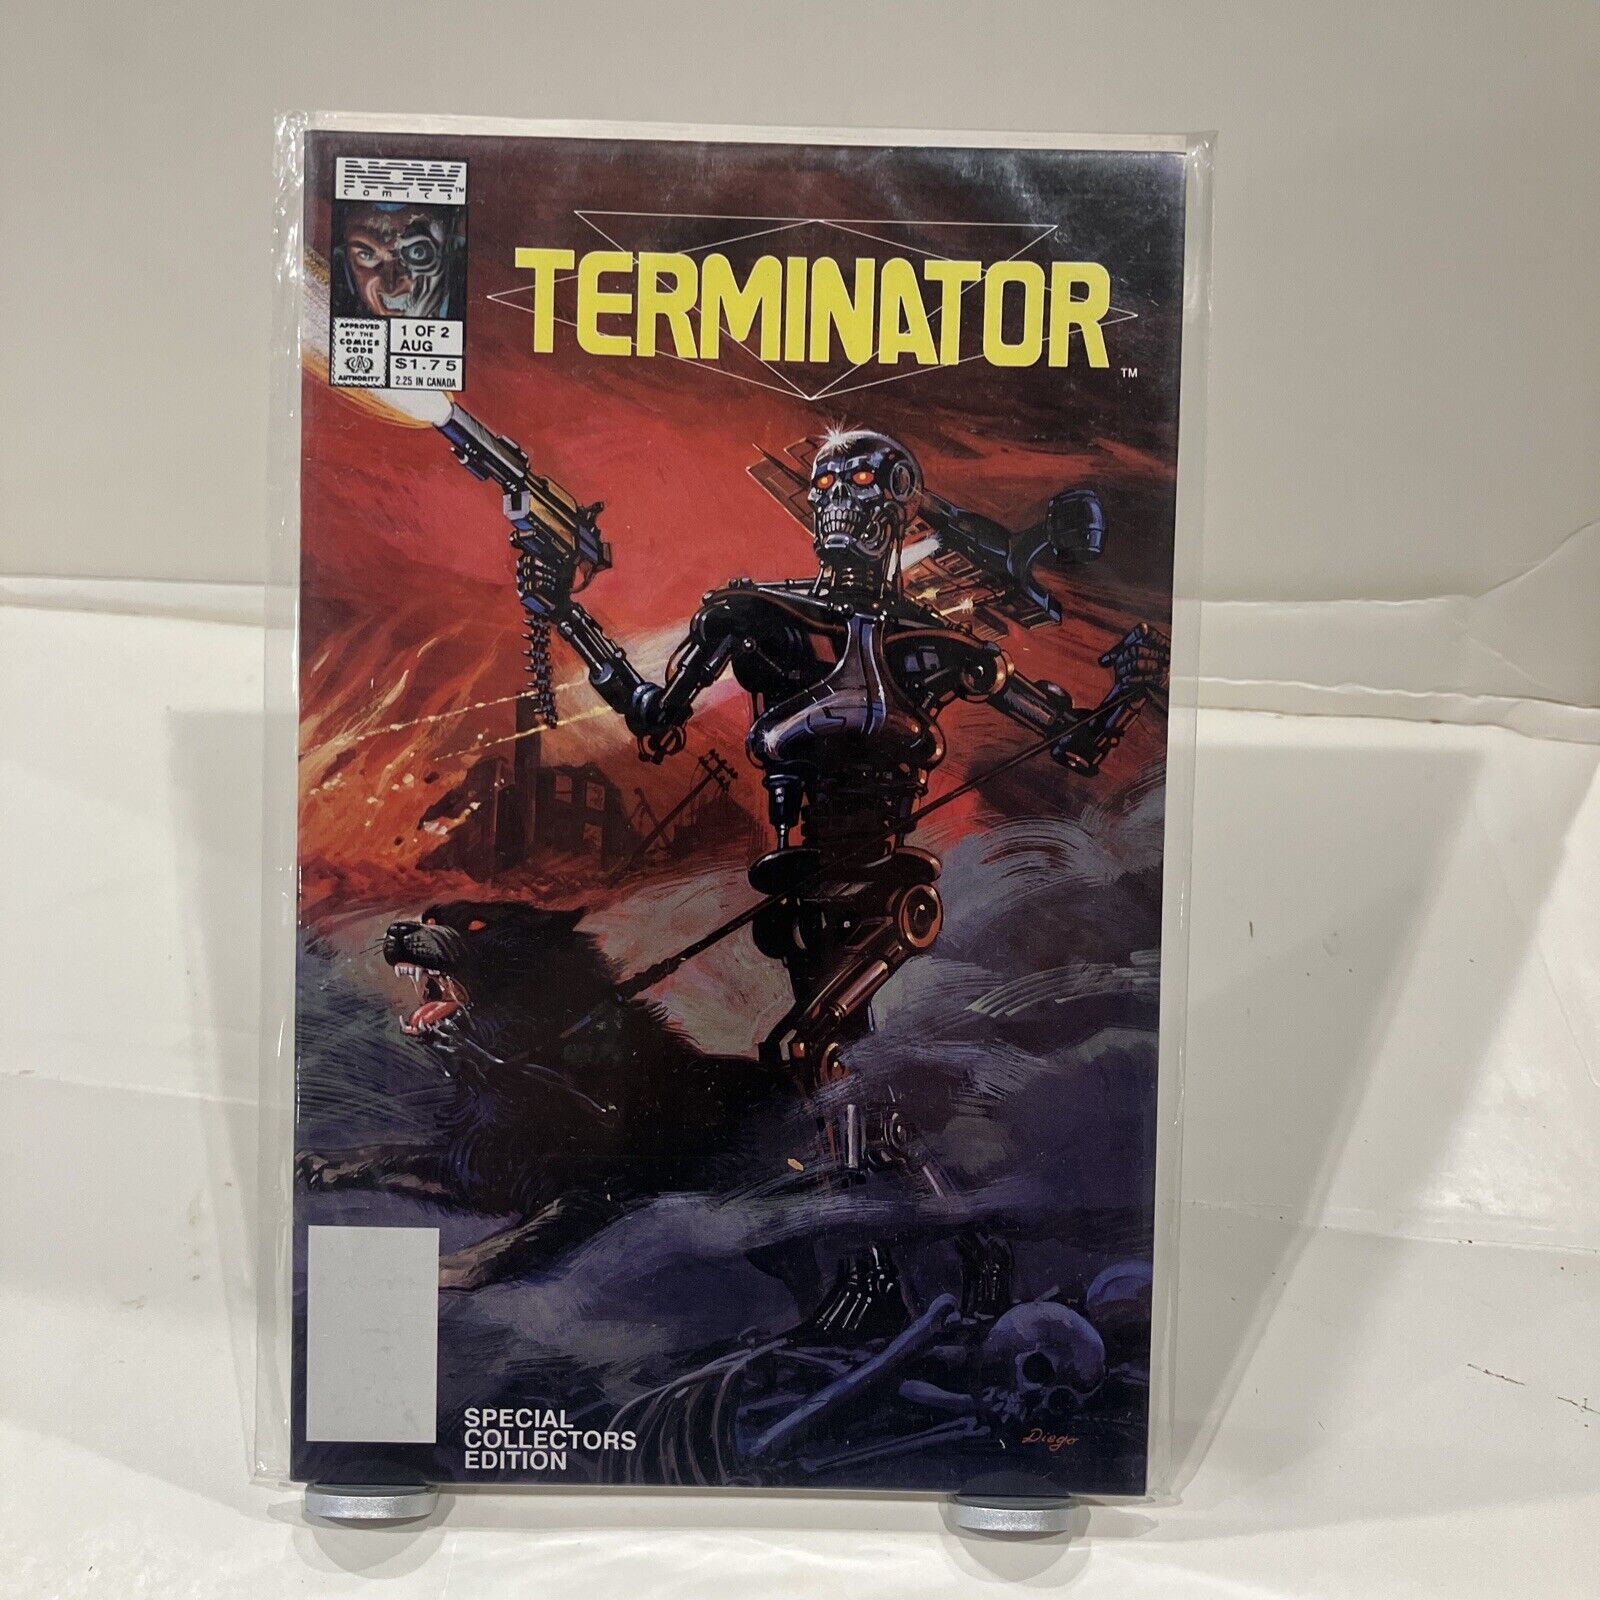 TERMINATOR SPECIAL COLLECTORS EDITION #1 OF 2 (VF/NM) COPPER AGE NOW, ALEX ROSS